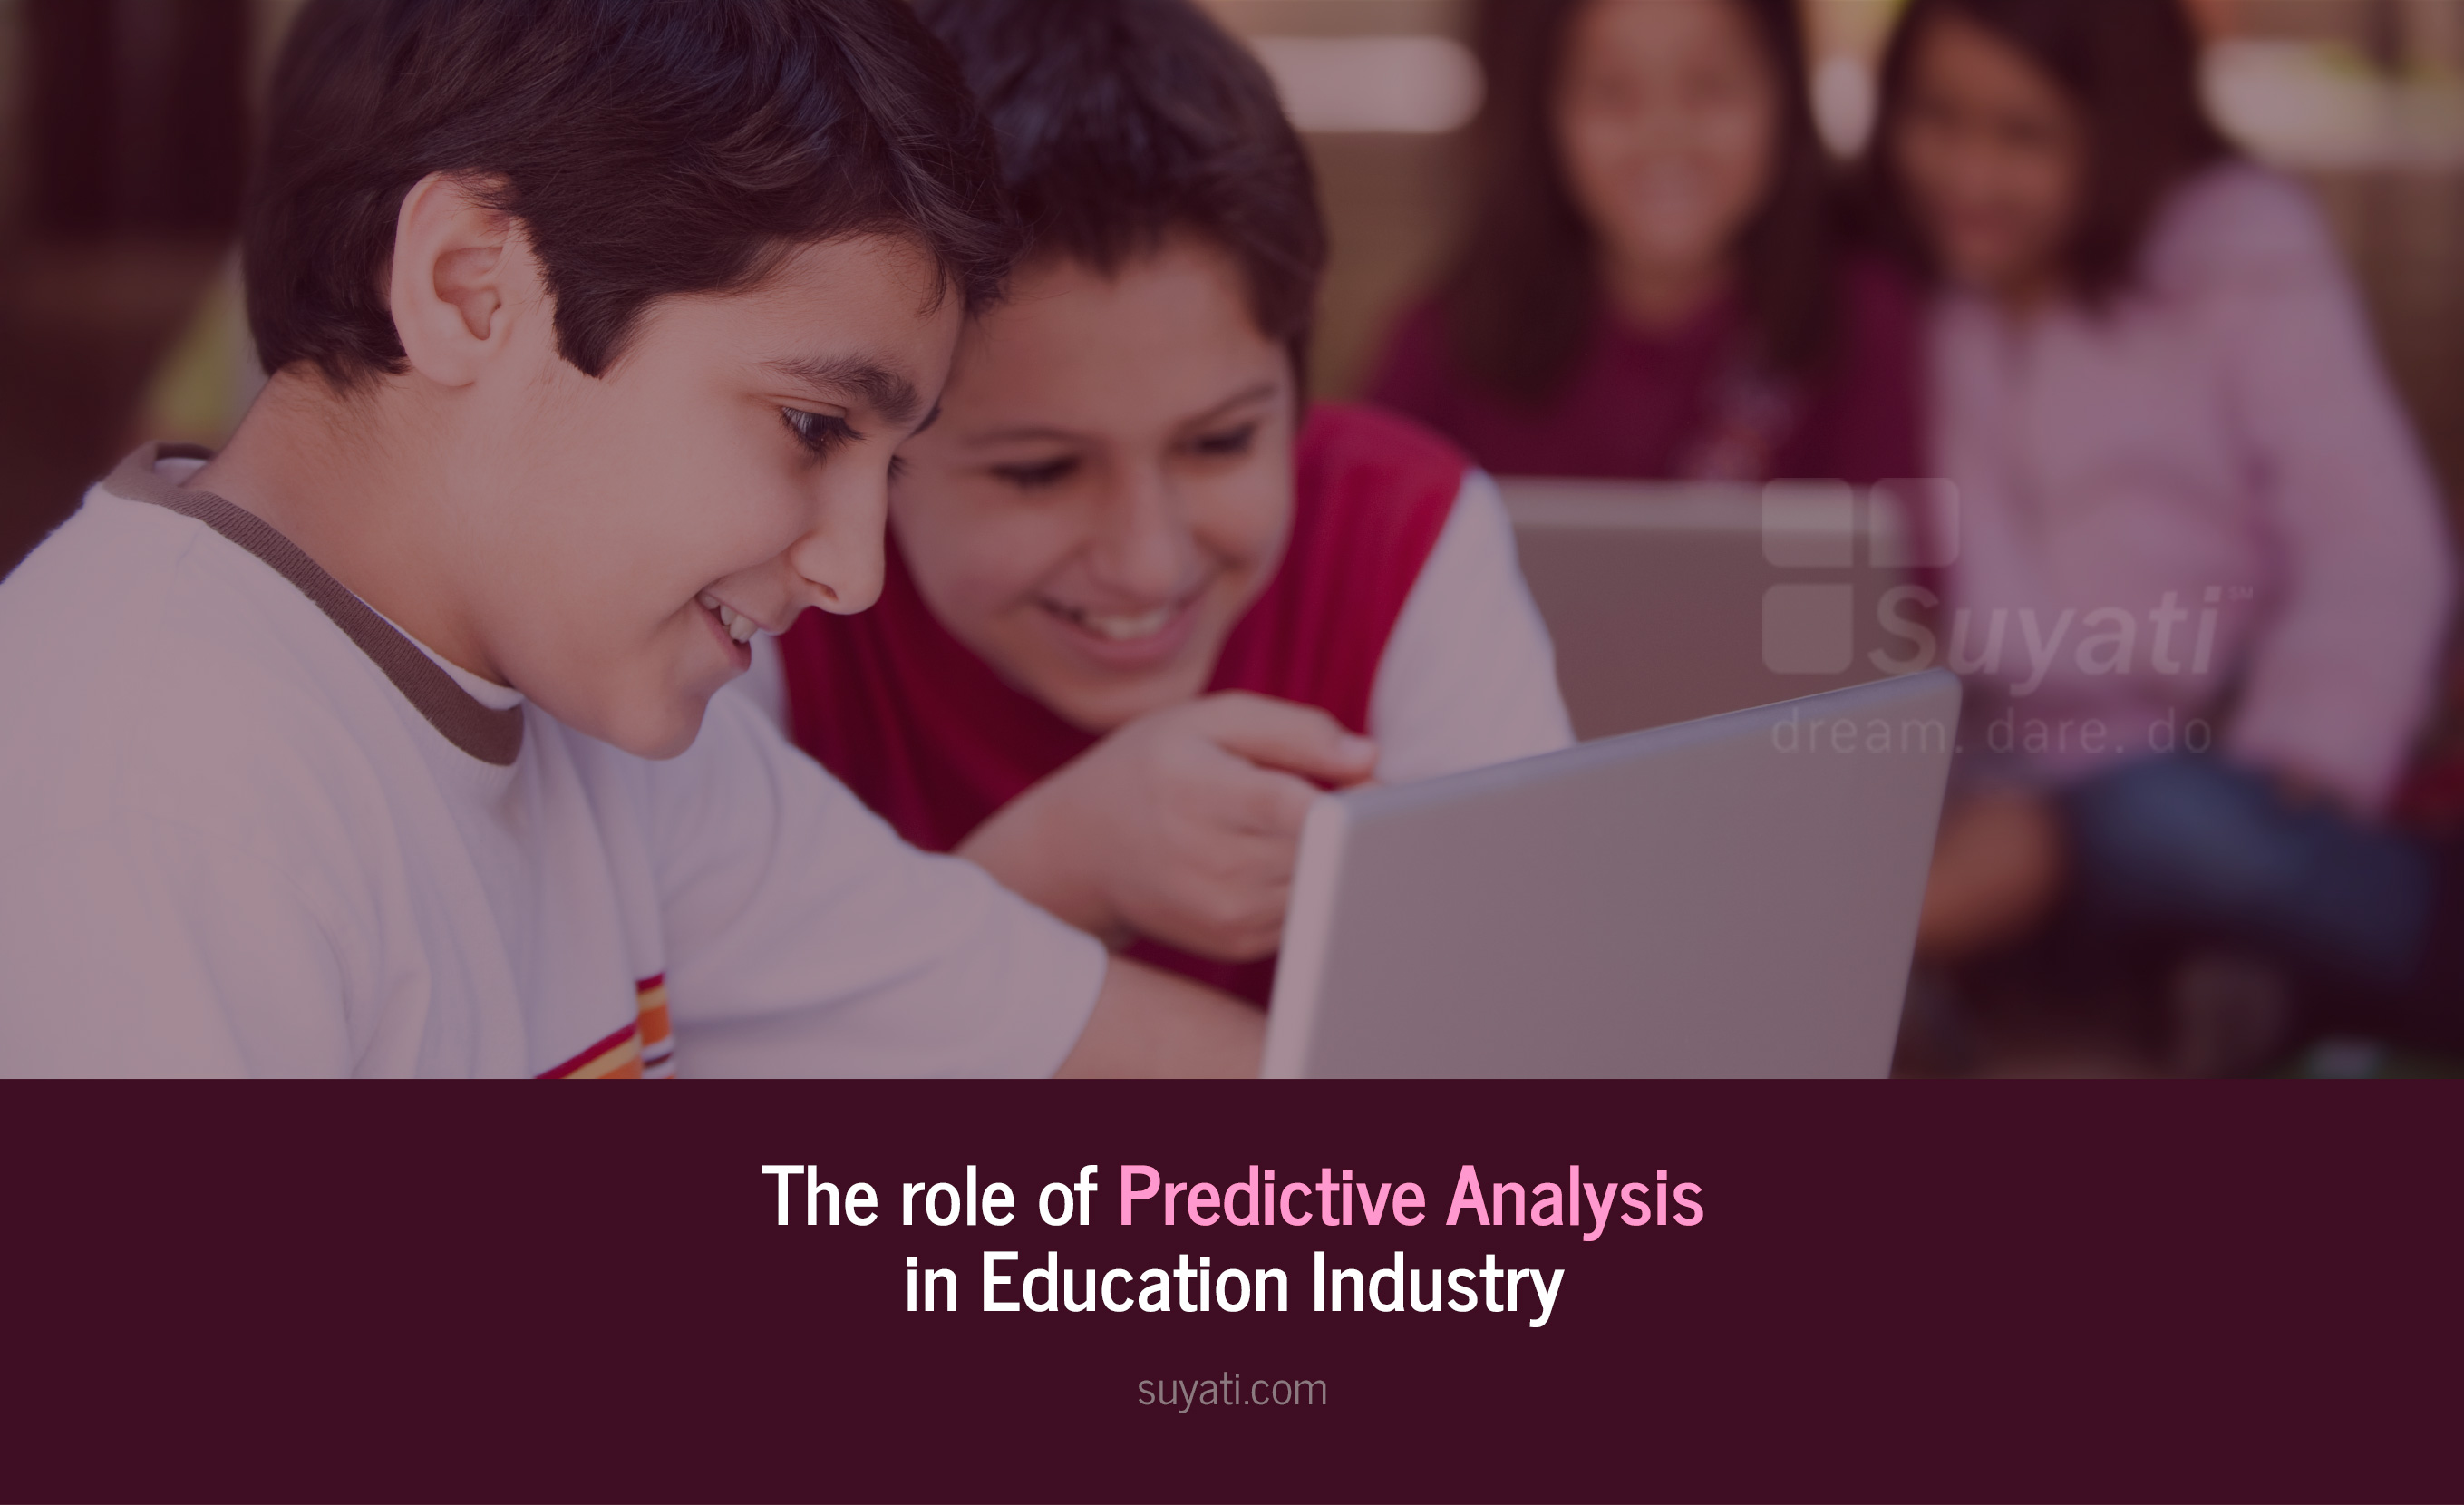 The role of Predictive Analysis in Education Industry